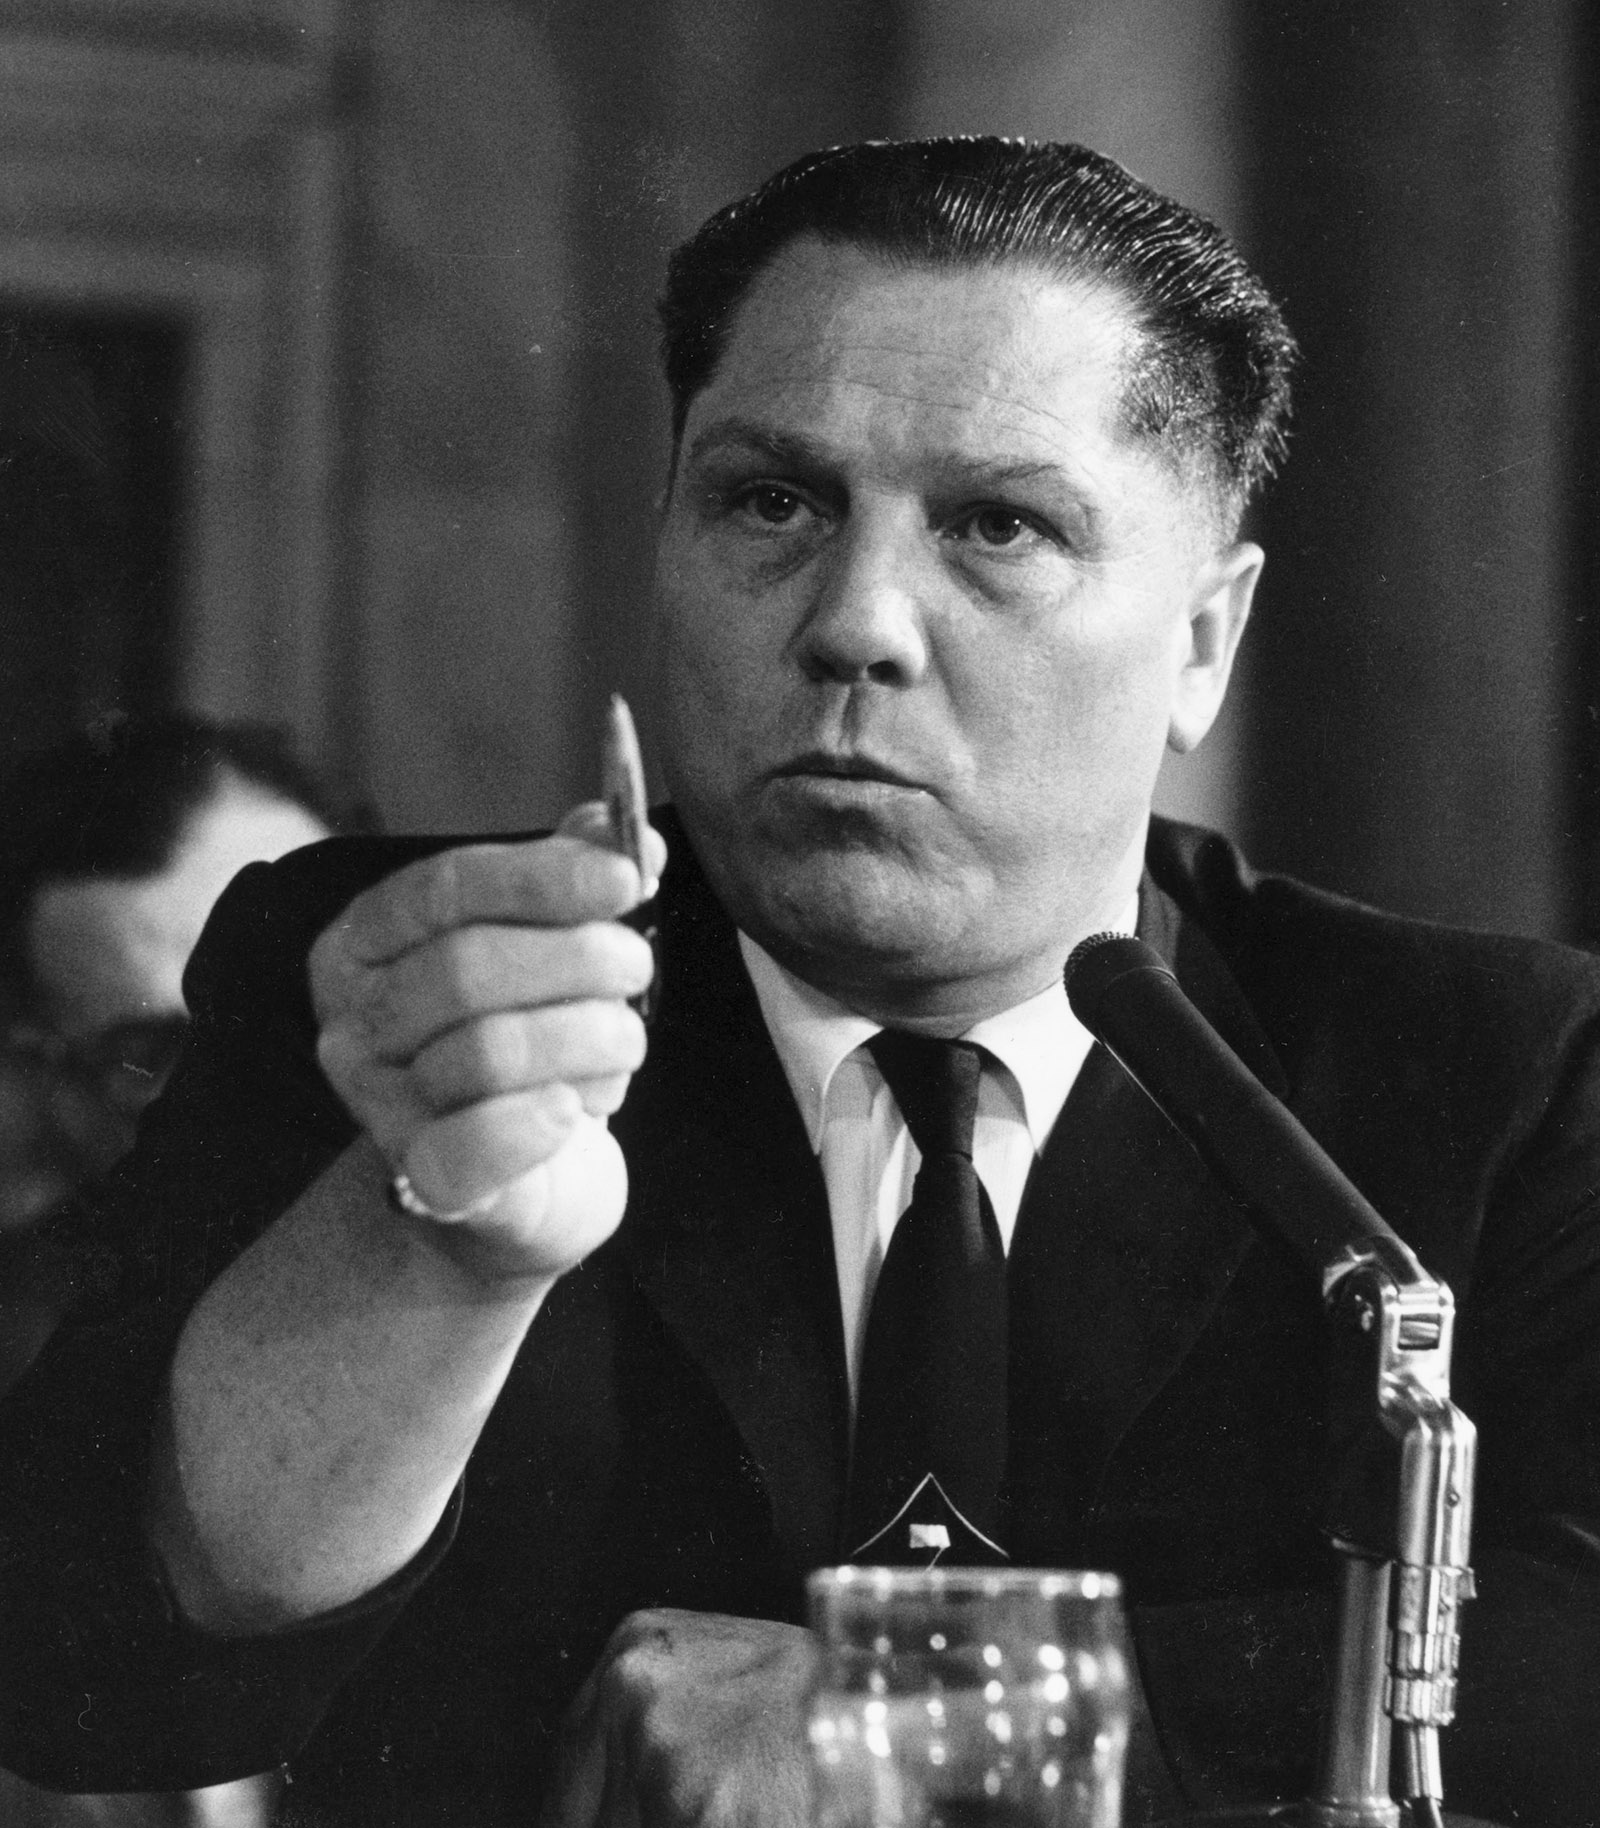 Teamsters Union President Jimmy Hoffa testifying at a Senate hearing on labor racketeering, Washington, D.C., August 11, 1958